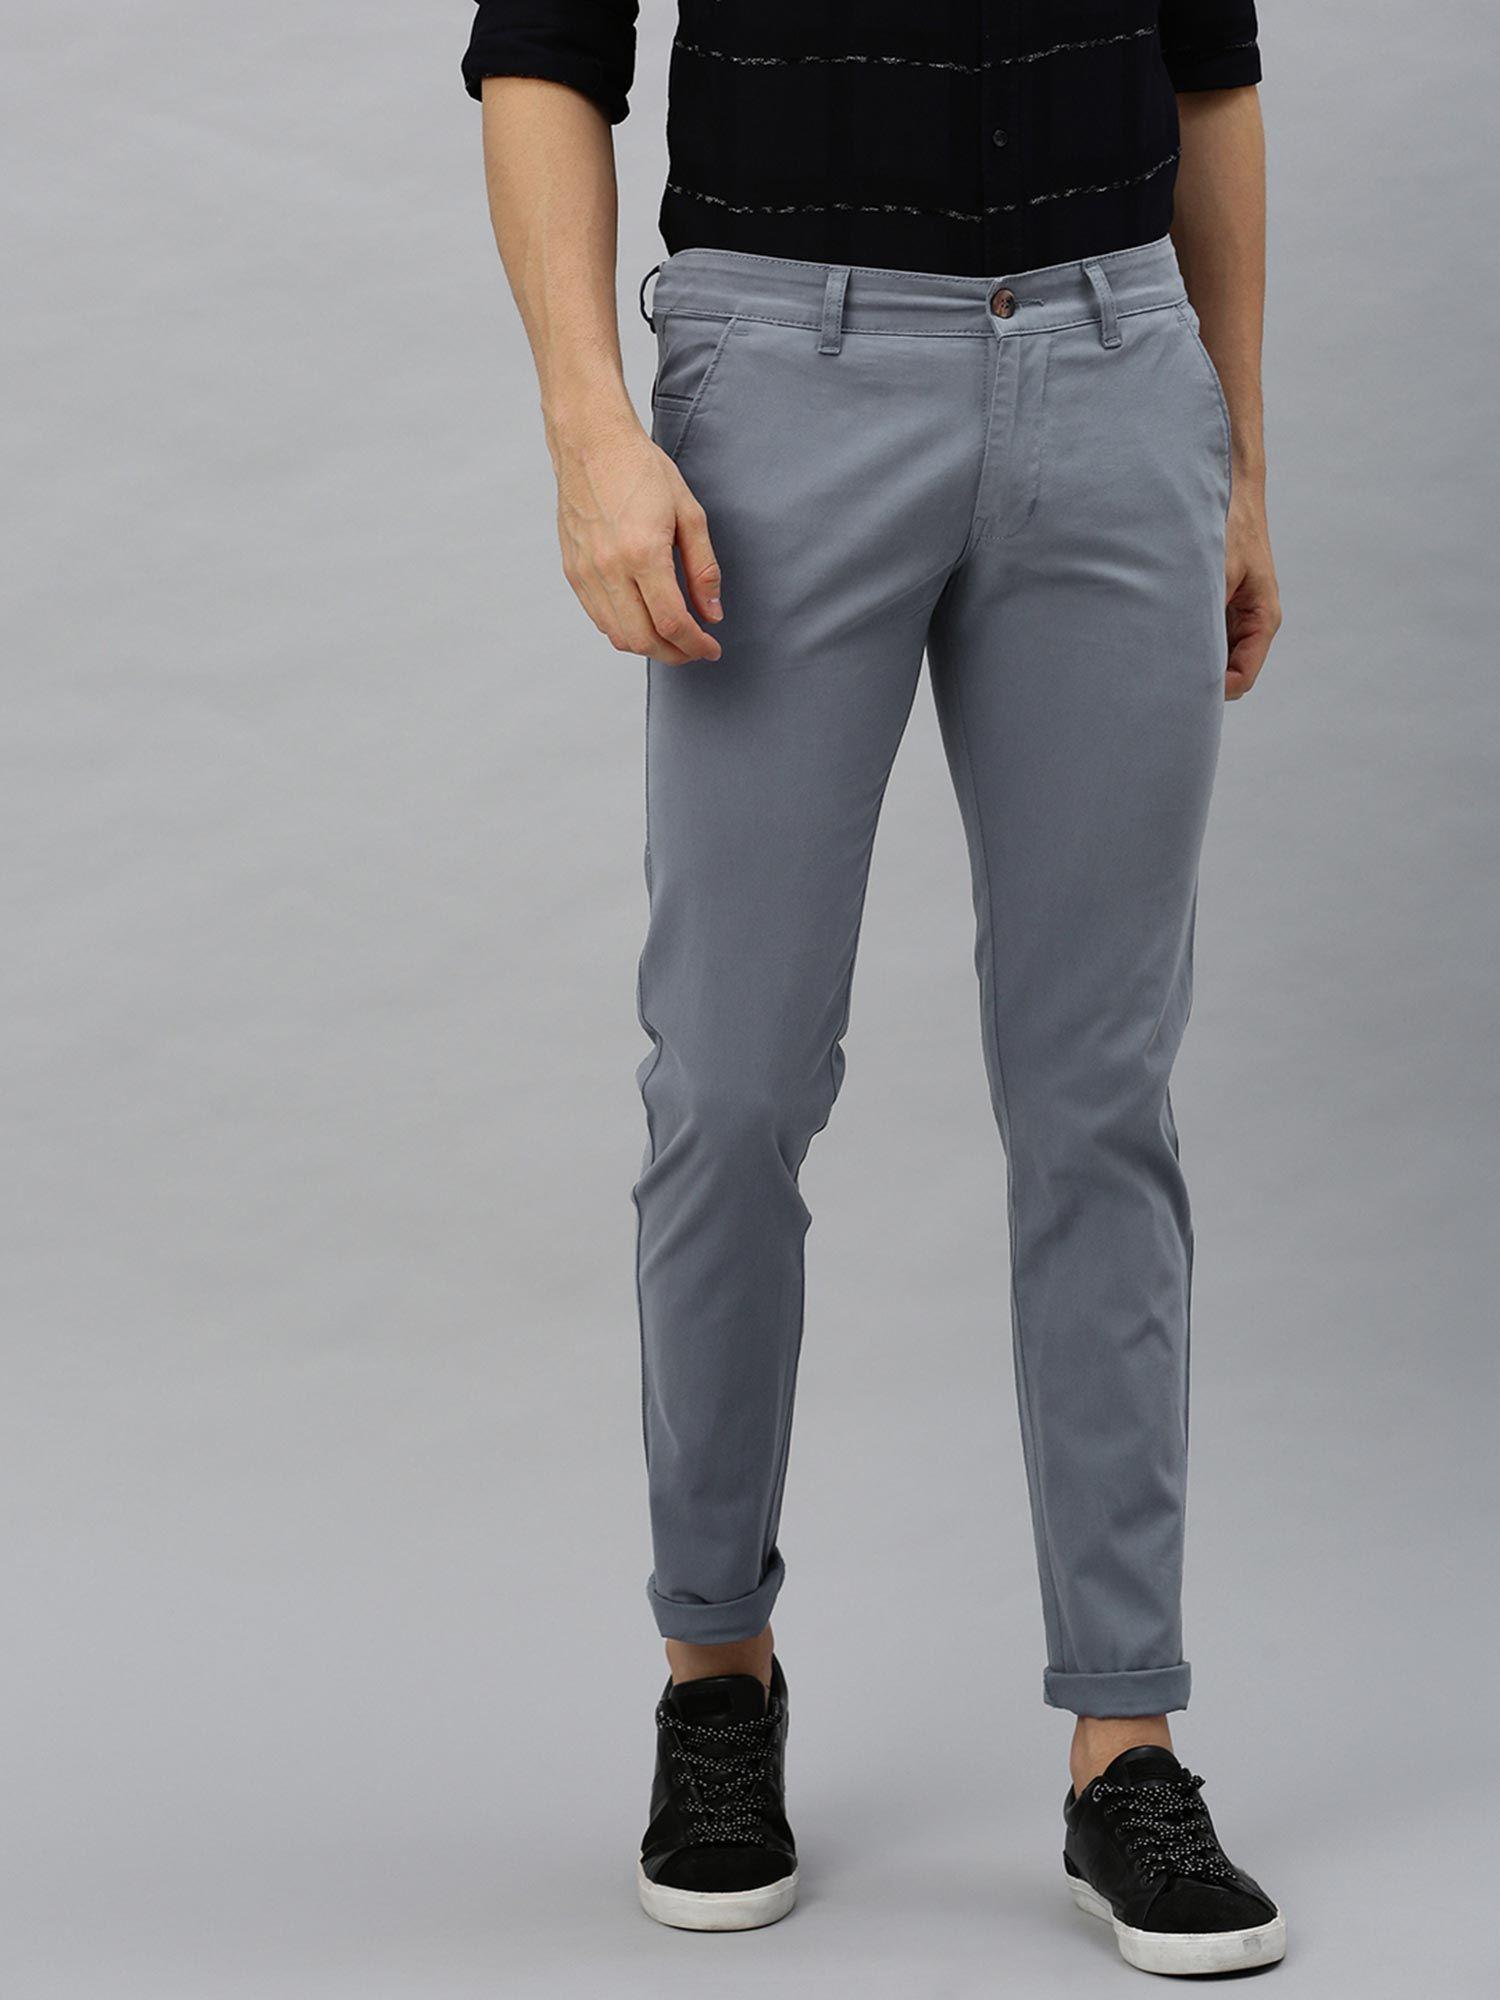 men steel blue cotton slim fit casual chinos trousers stretch